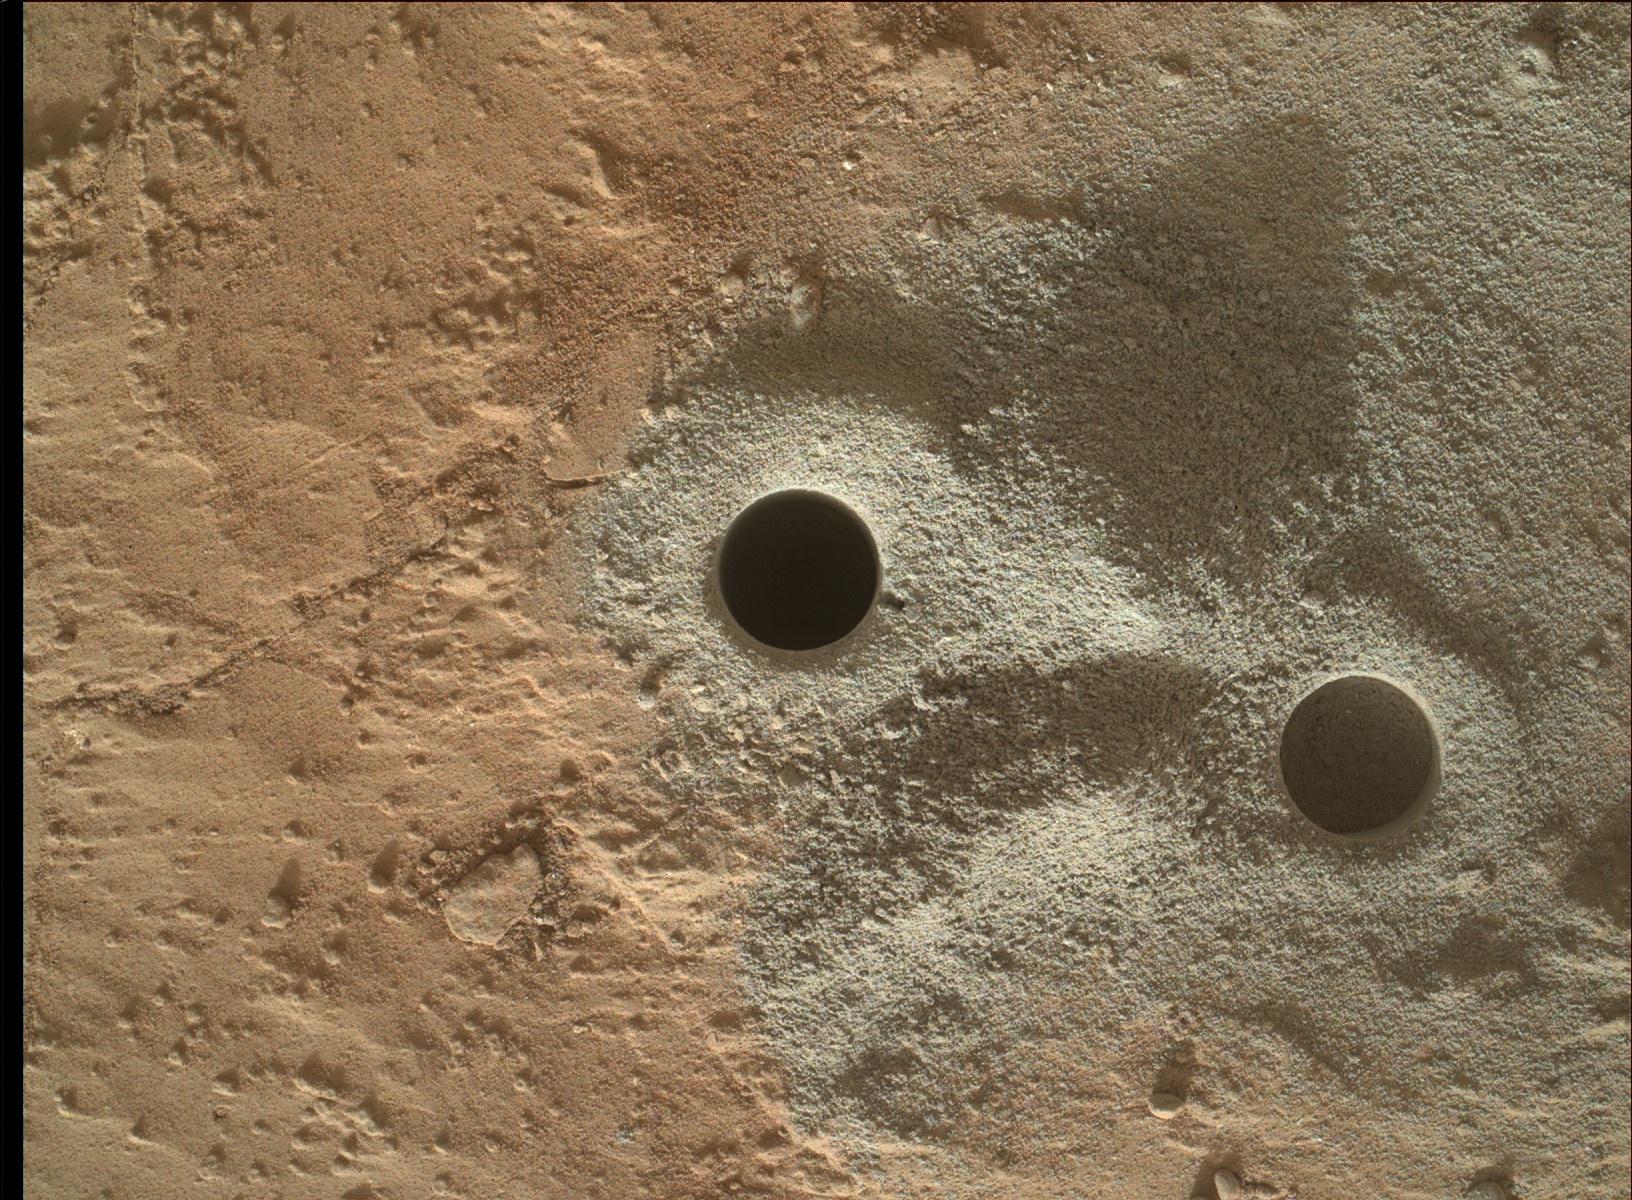 Nasa's Mars rover Curiosity acquired this image using its Mars Hand Lens Imager (MAHLI) on Sol 230